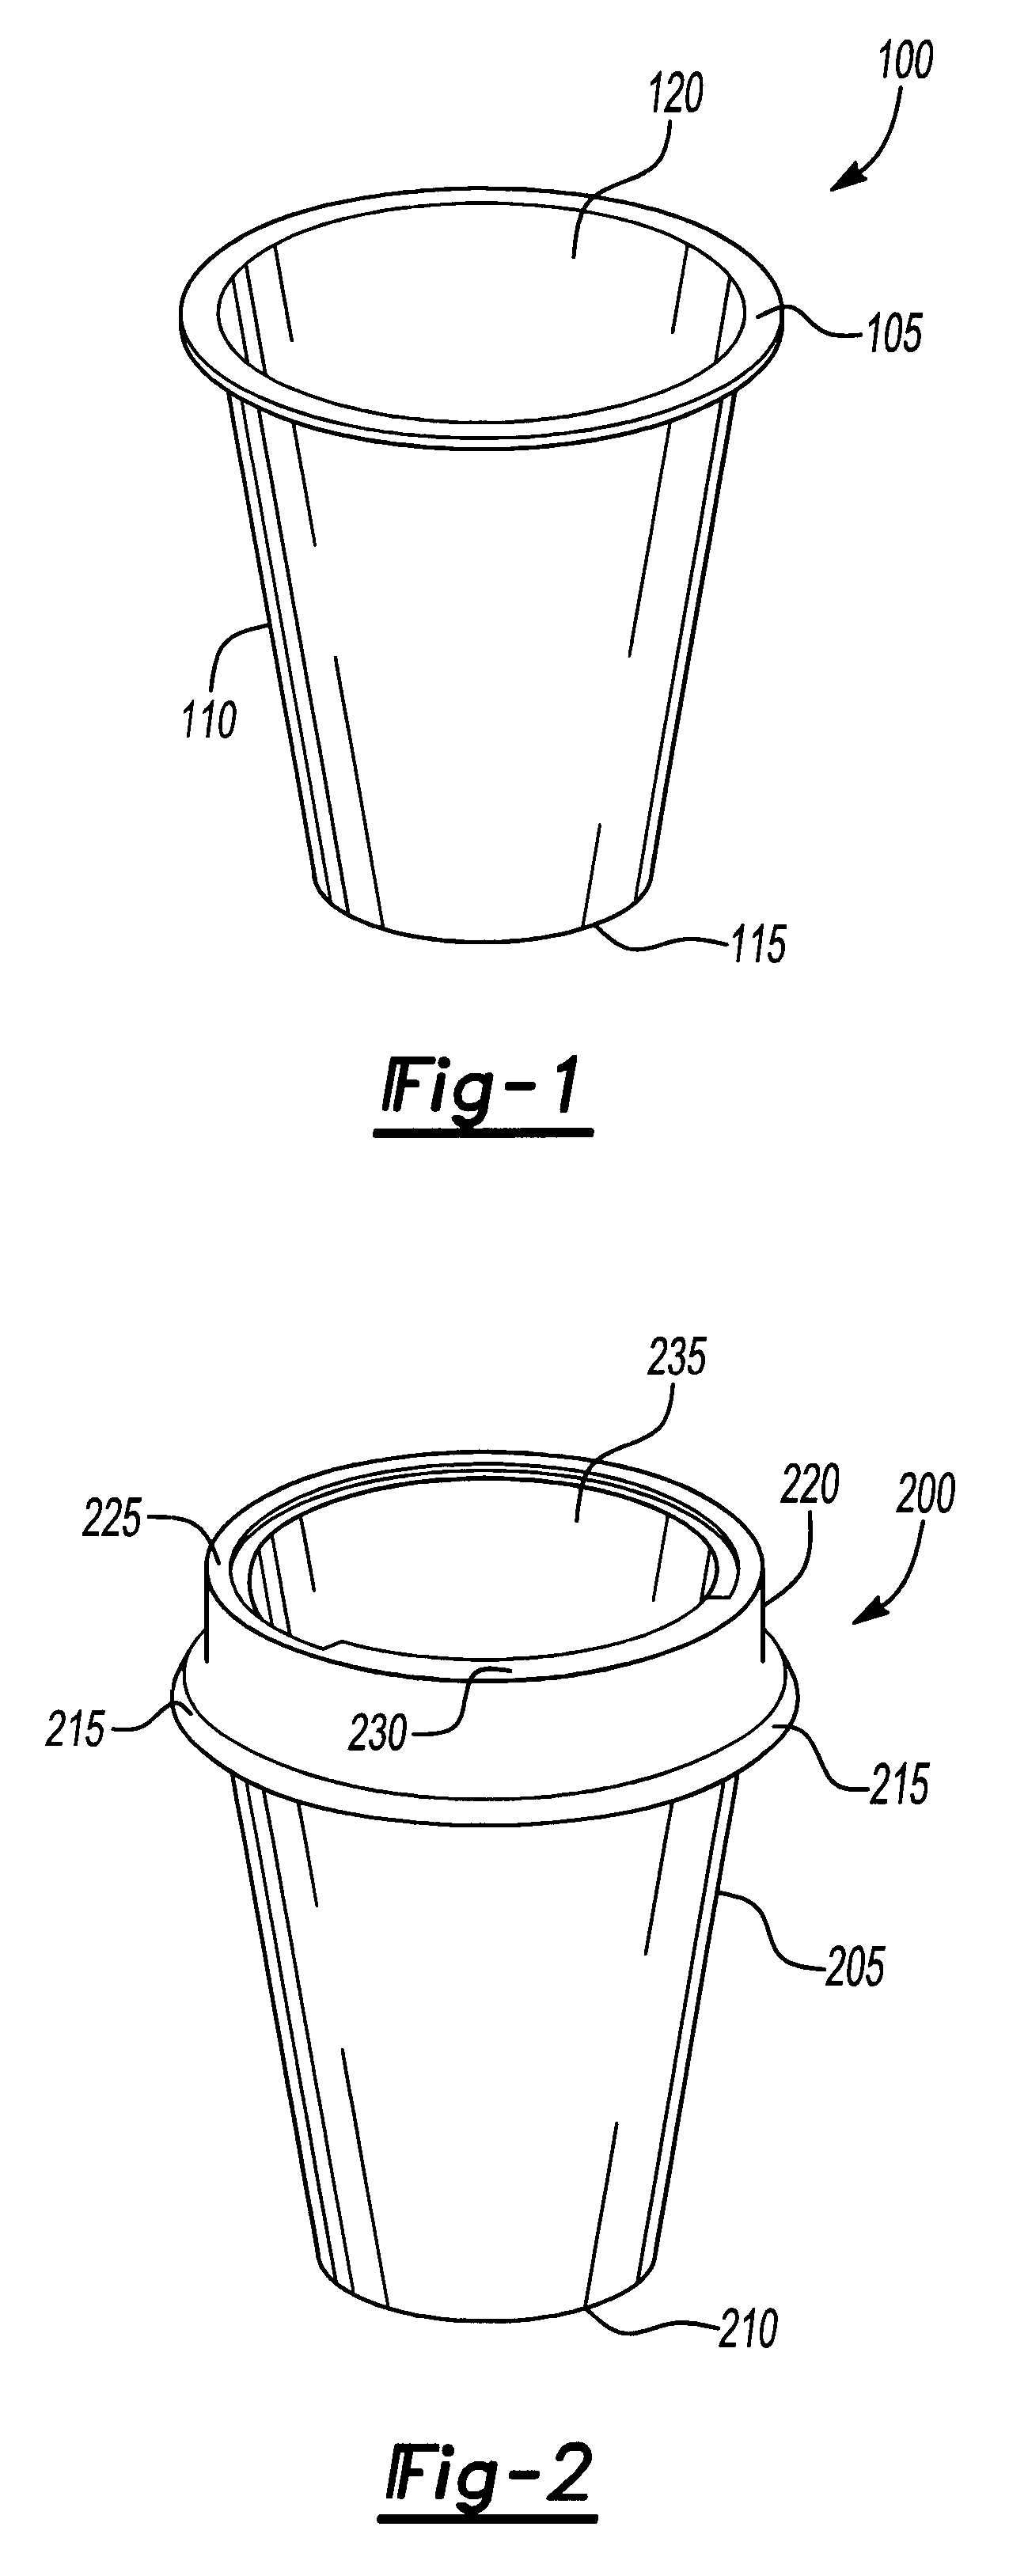 Single handed container for mixing foods